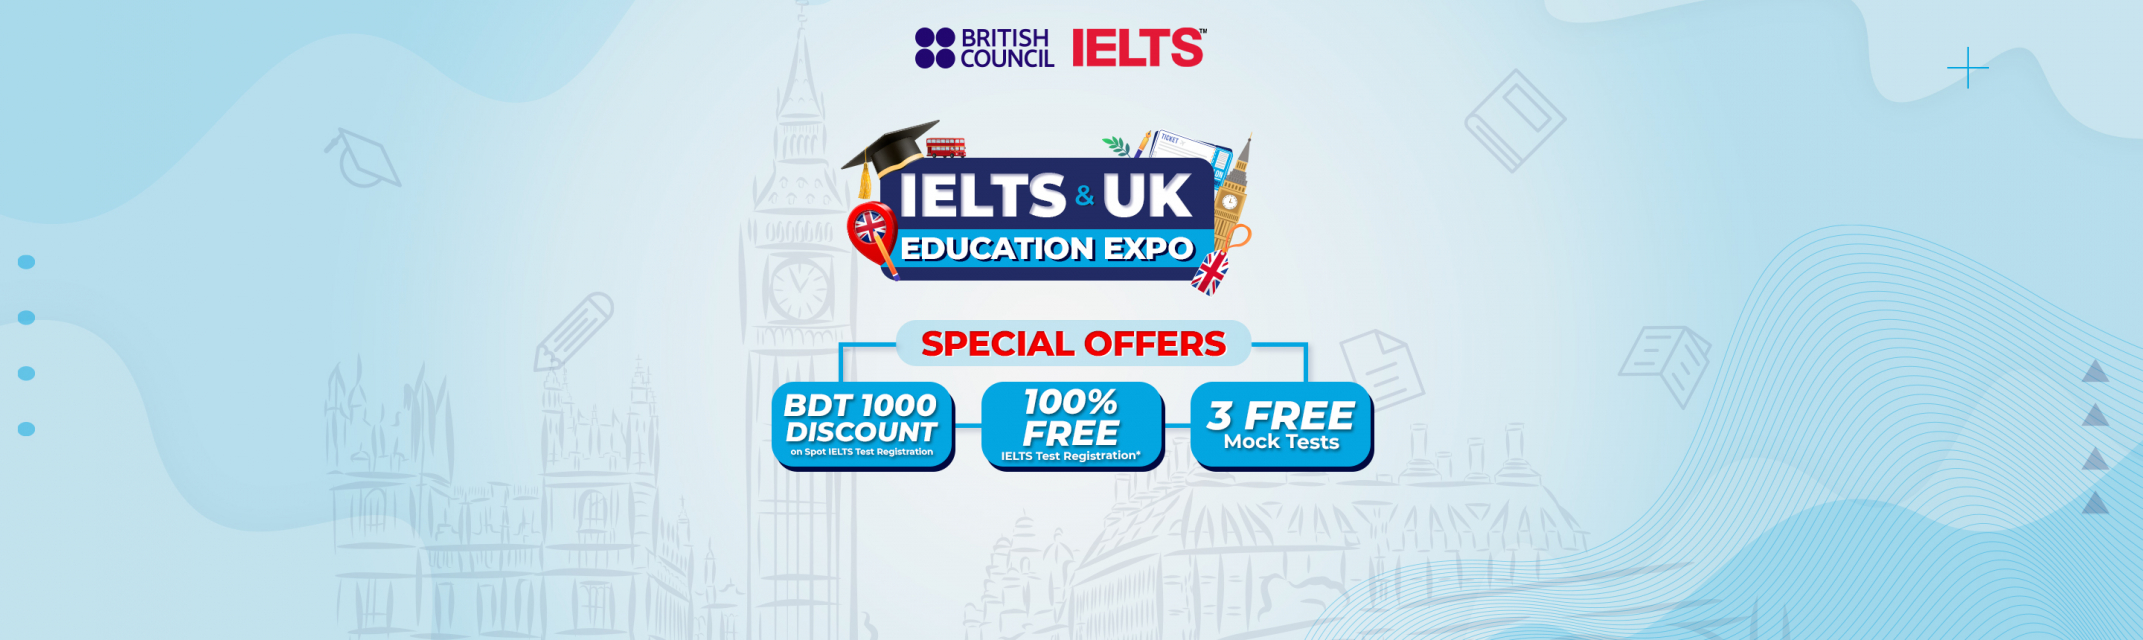 IELTS and UK Education Expo